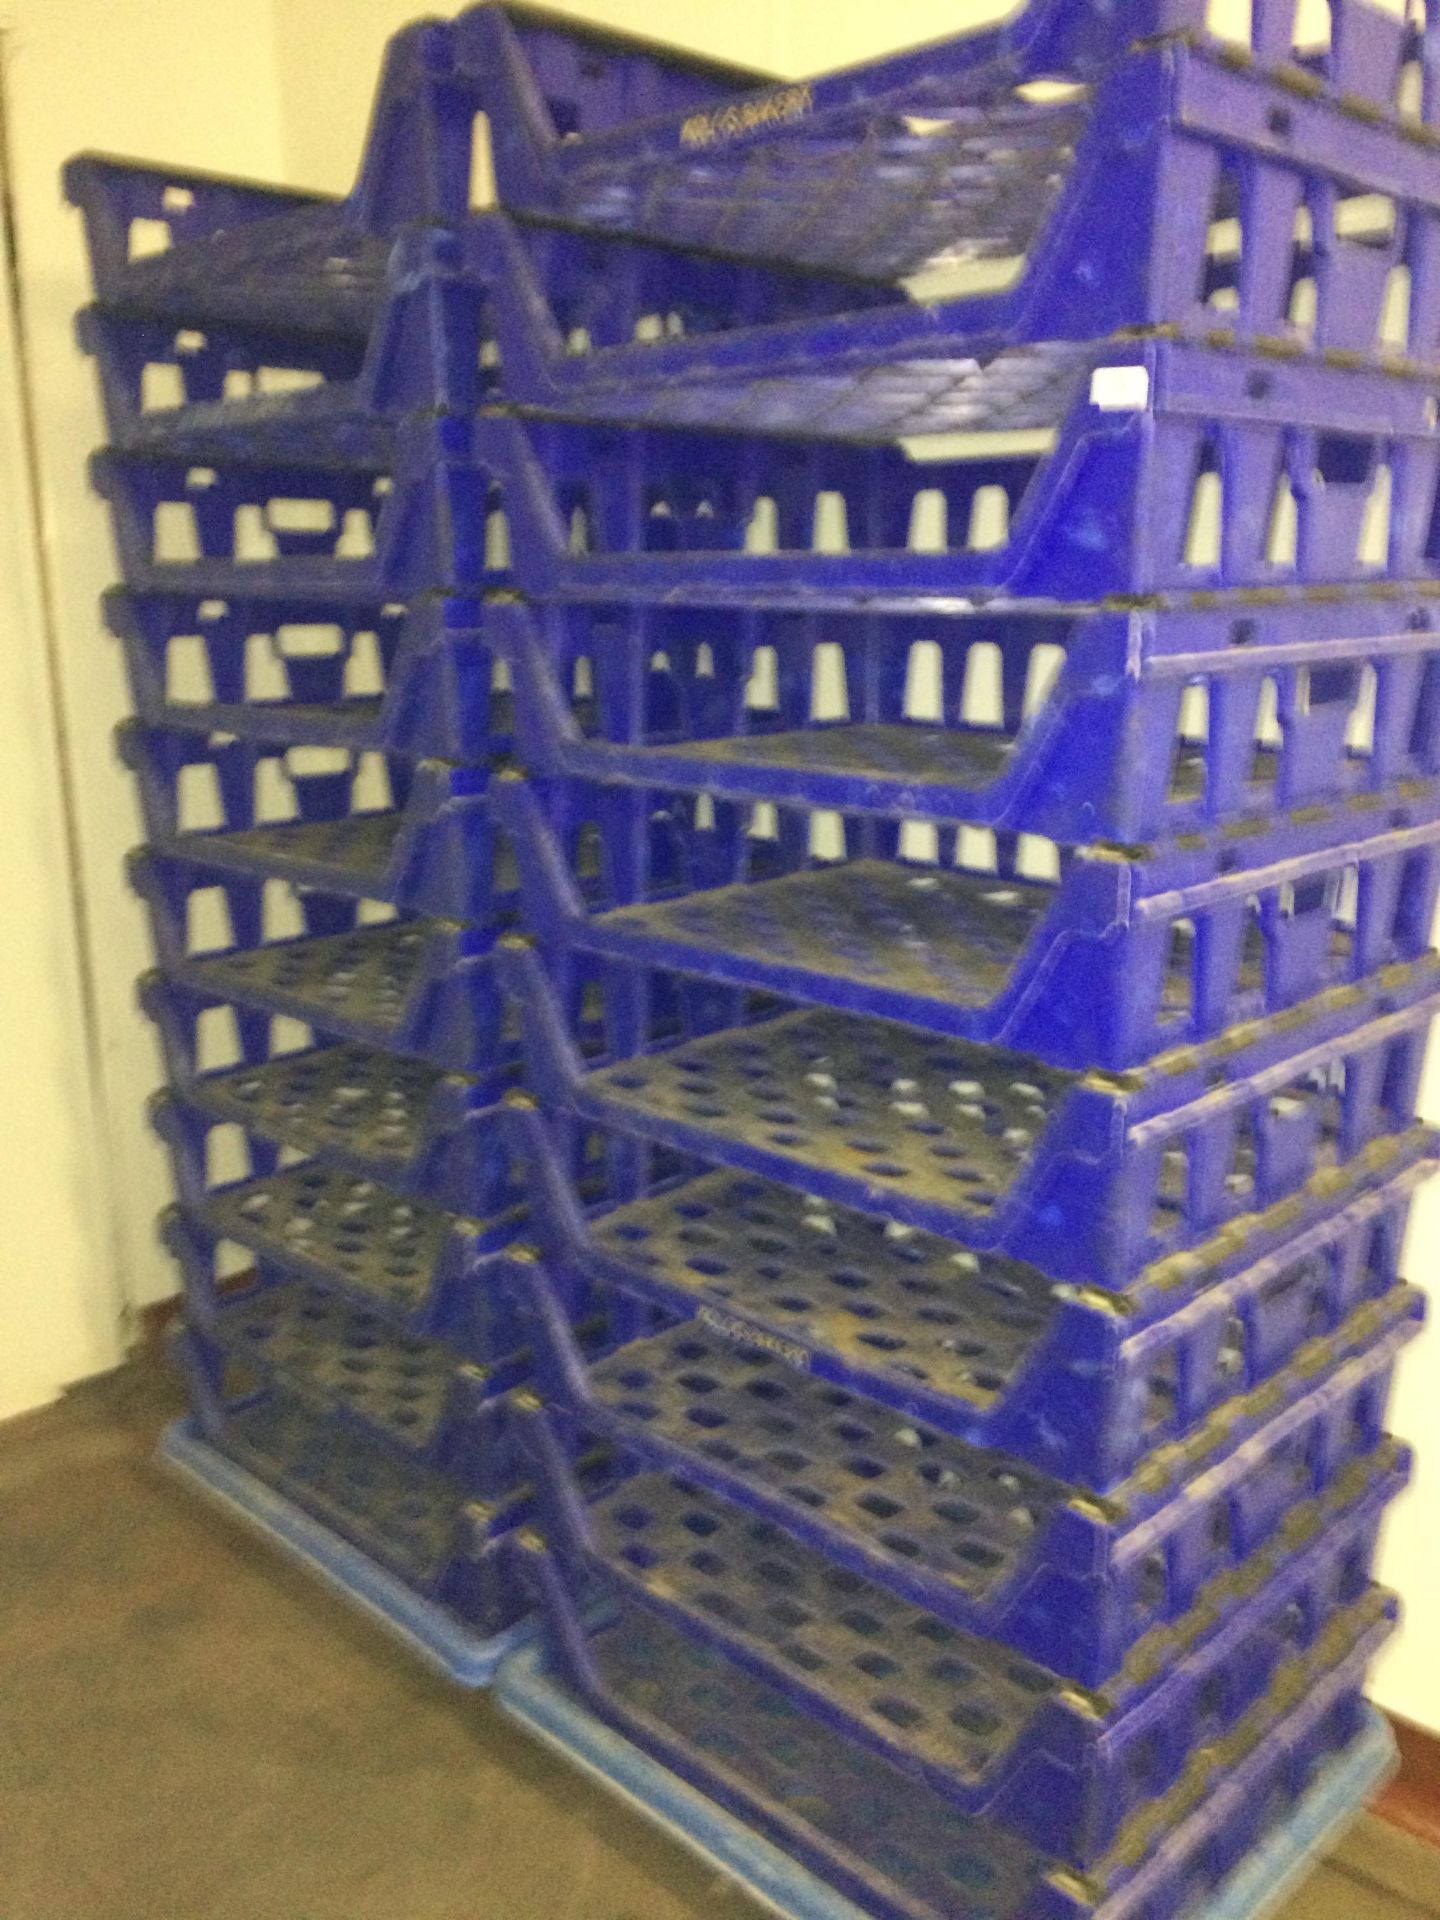 20 x blue plastic bakers trays on two mobile trollies - this lot is to be viewed and collected from